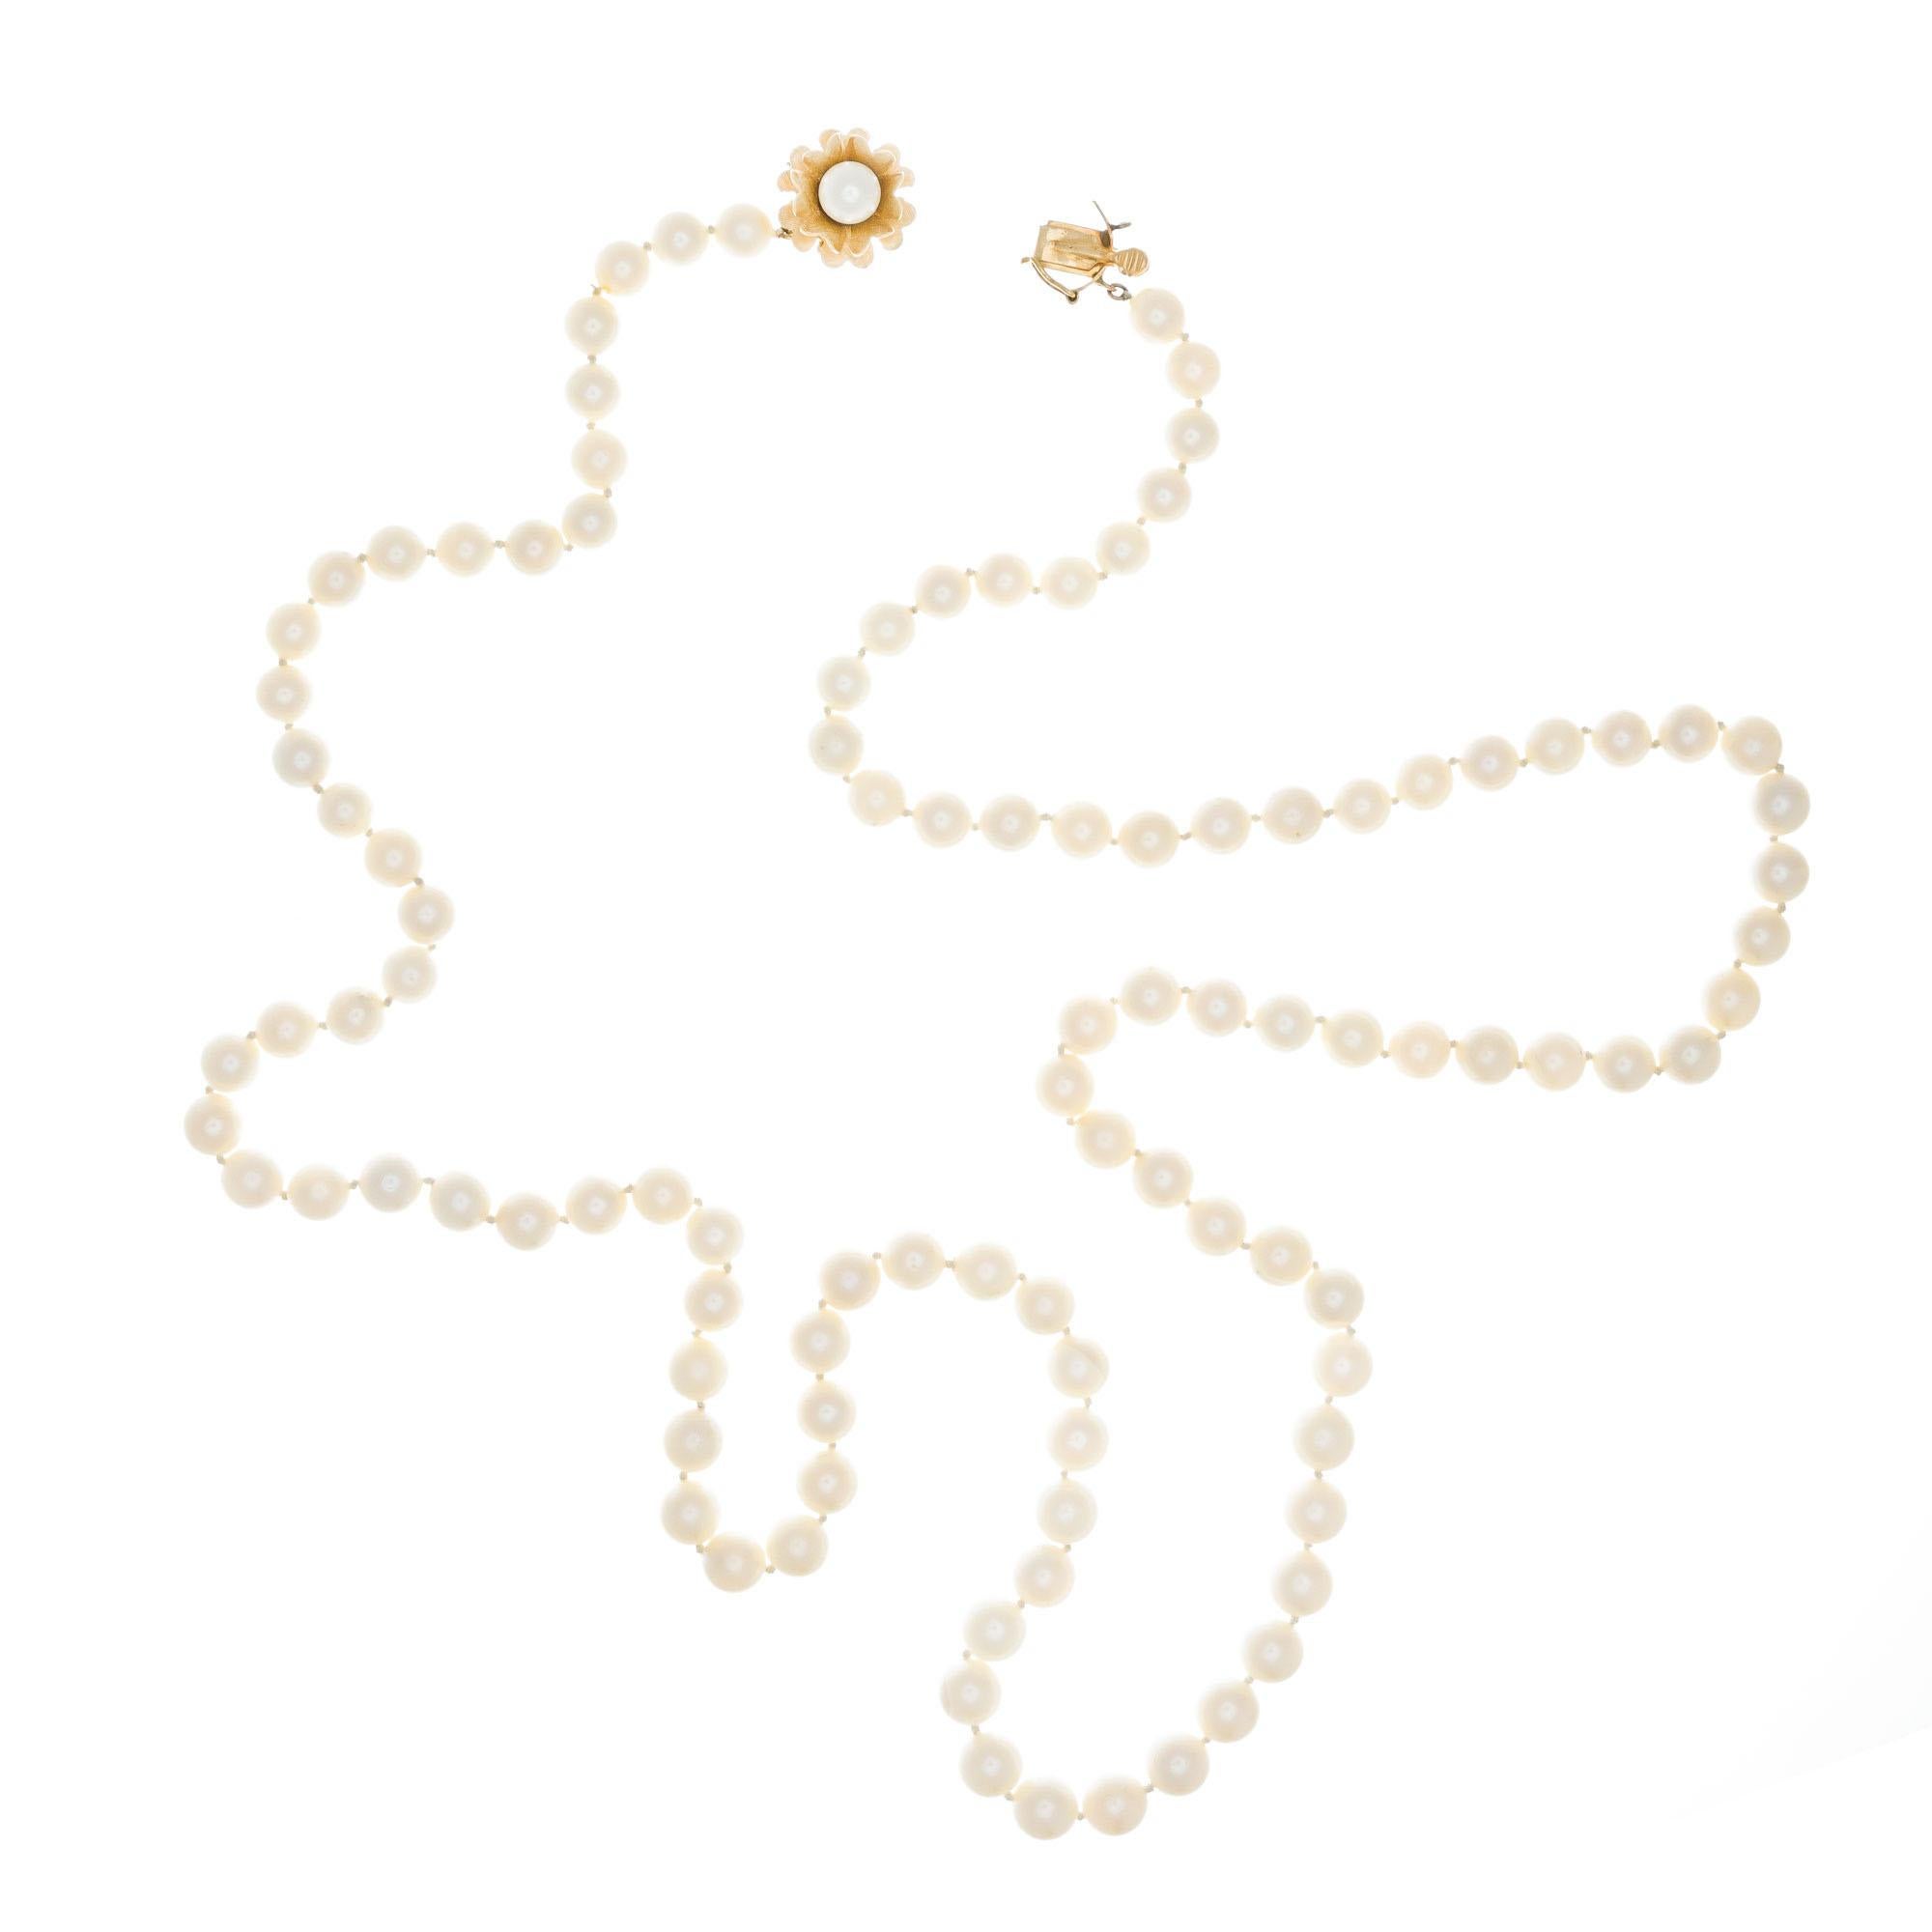 Mid-Century 1950’s 30 Inch cultured pearl necklace with 14k yellow gold flower catch with a pearl. White with slight crème overtone, good lustre. Few to moderate blemishes. Well matched.

105 cultured white pearls, 6.5mm
14k yellow gold 
Stamped: